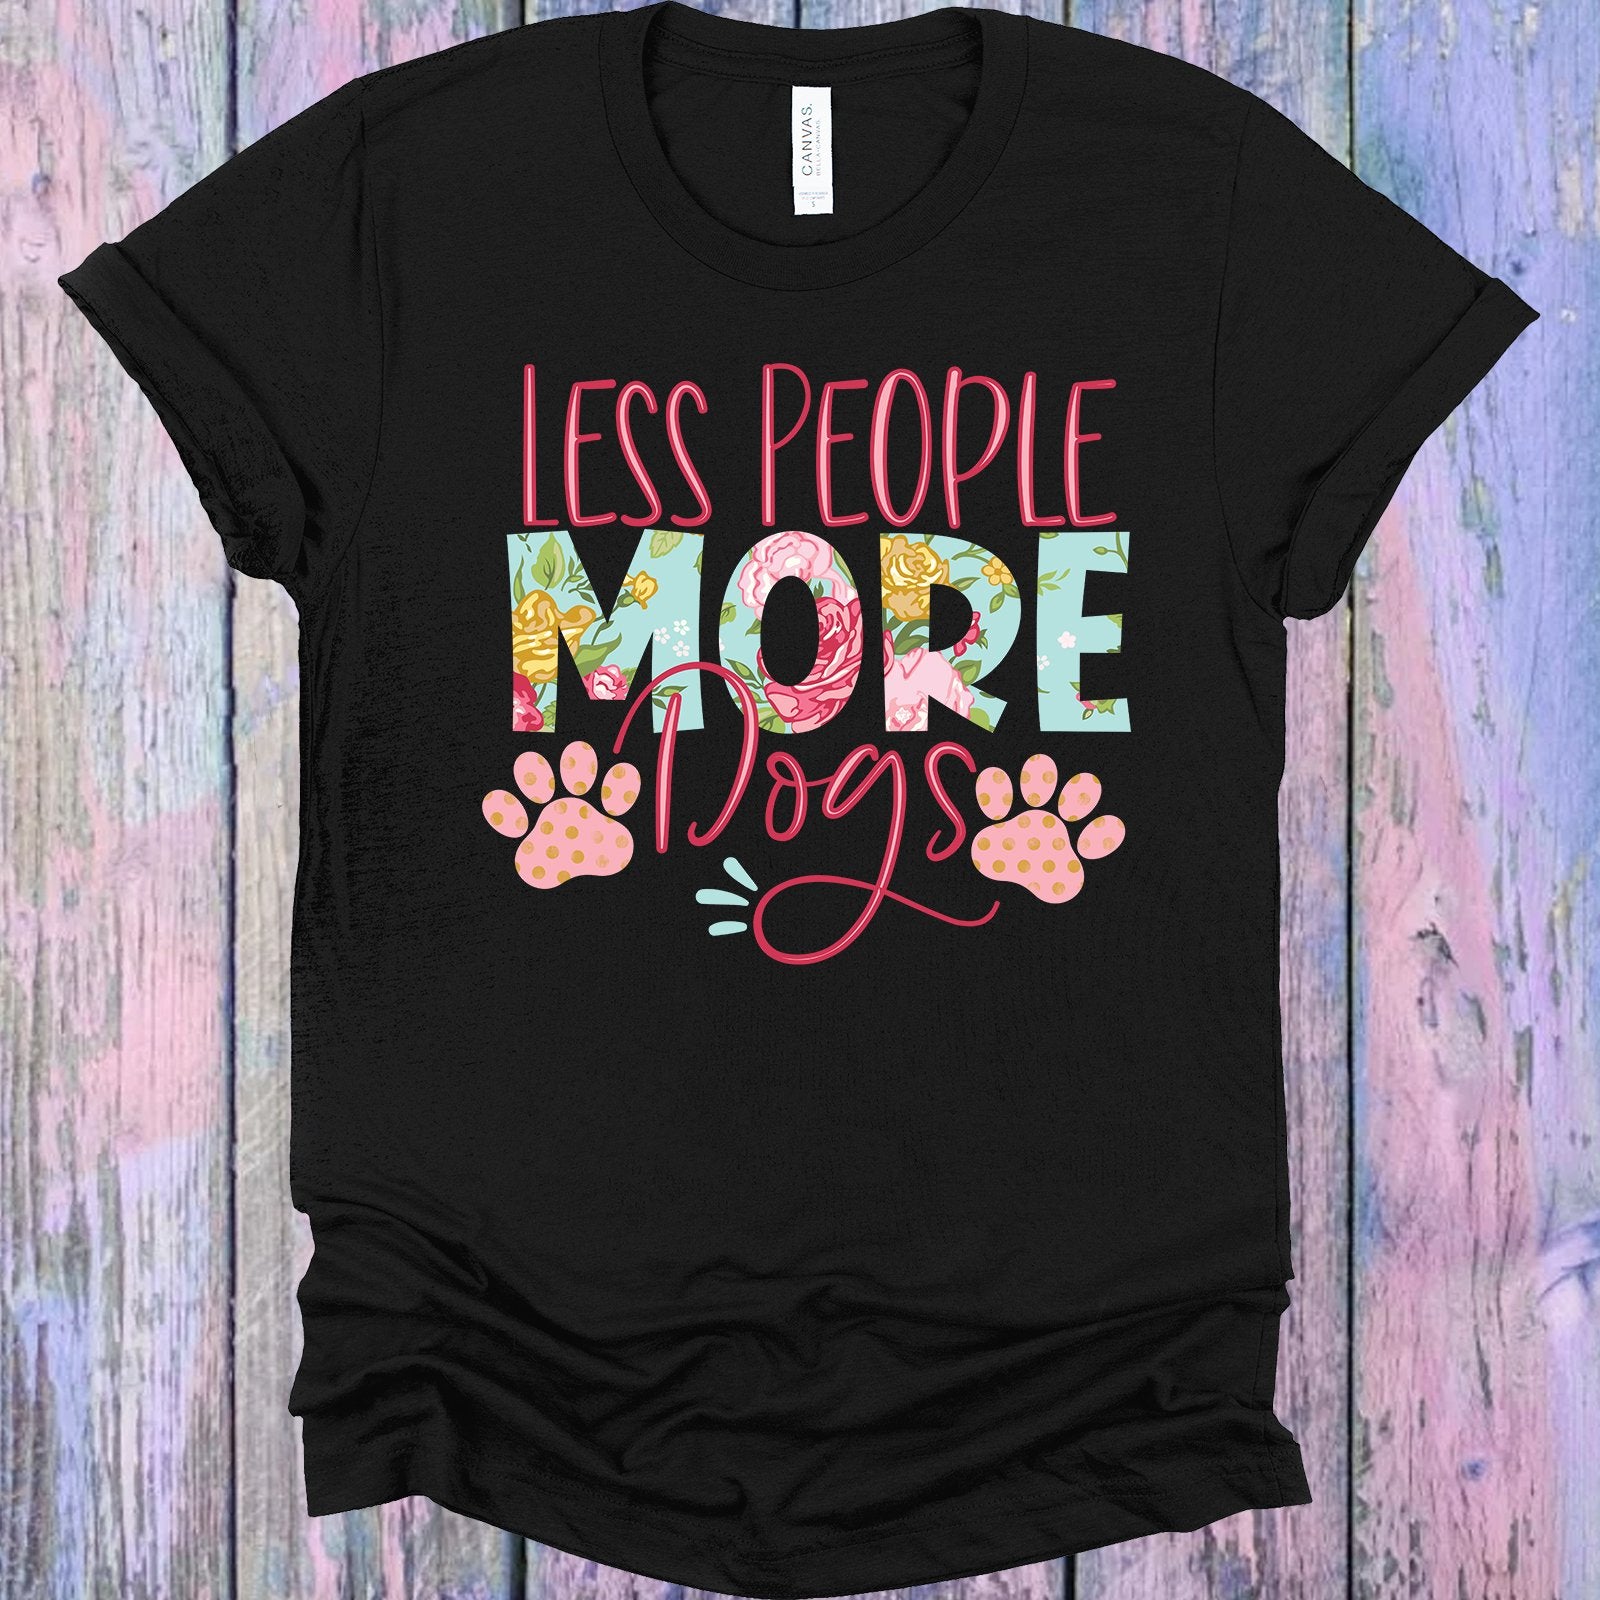 Less People More Dogs Graphic Tee Graphic Tee